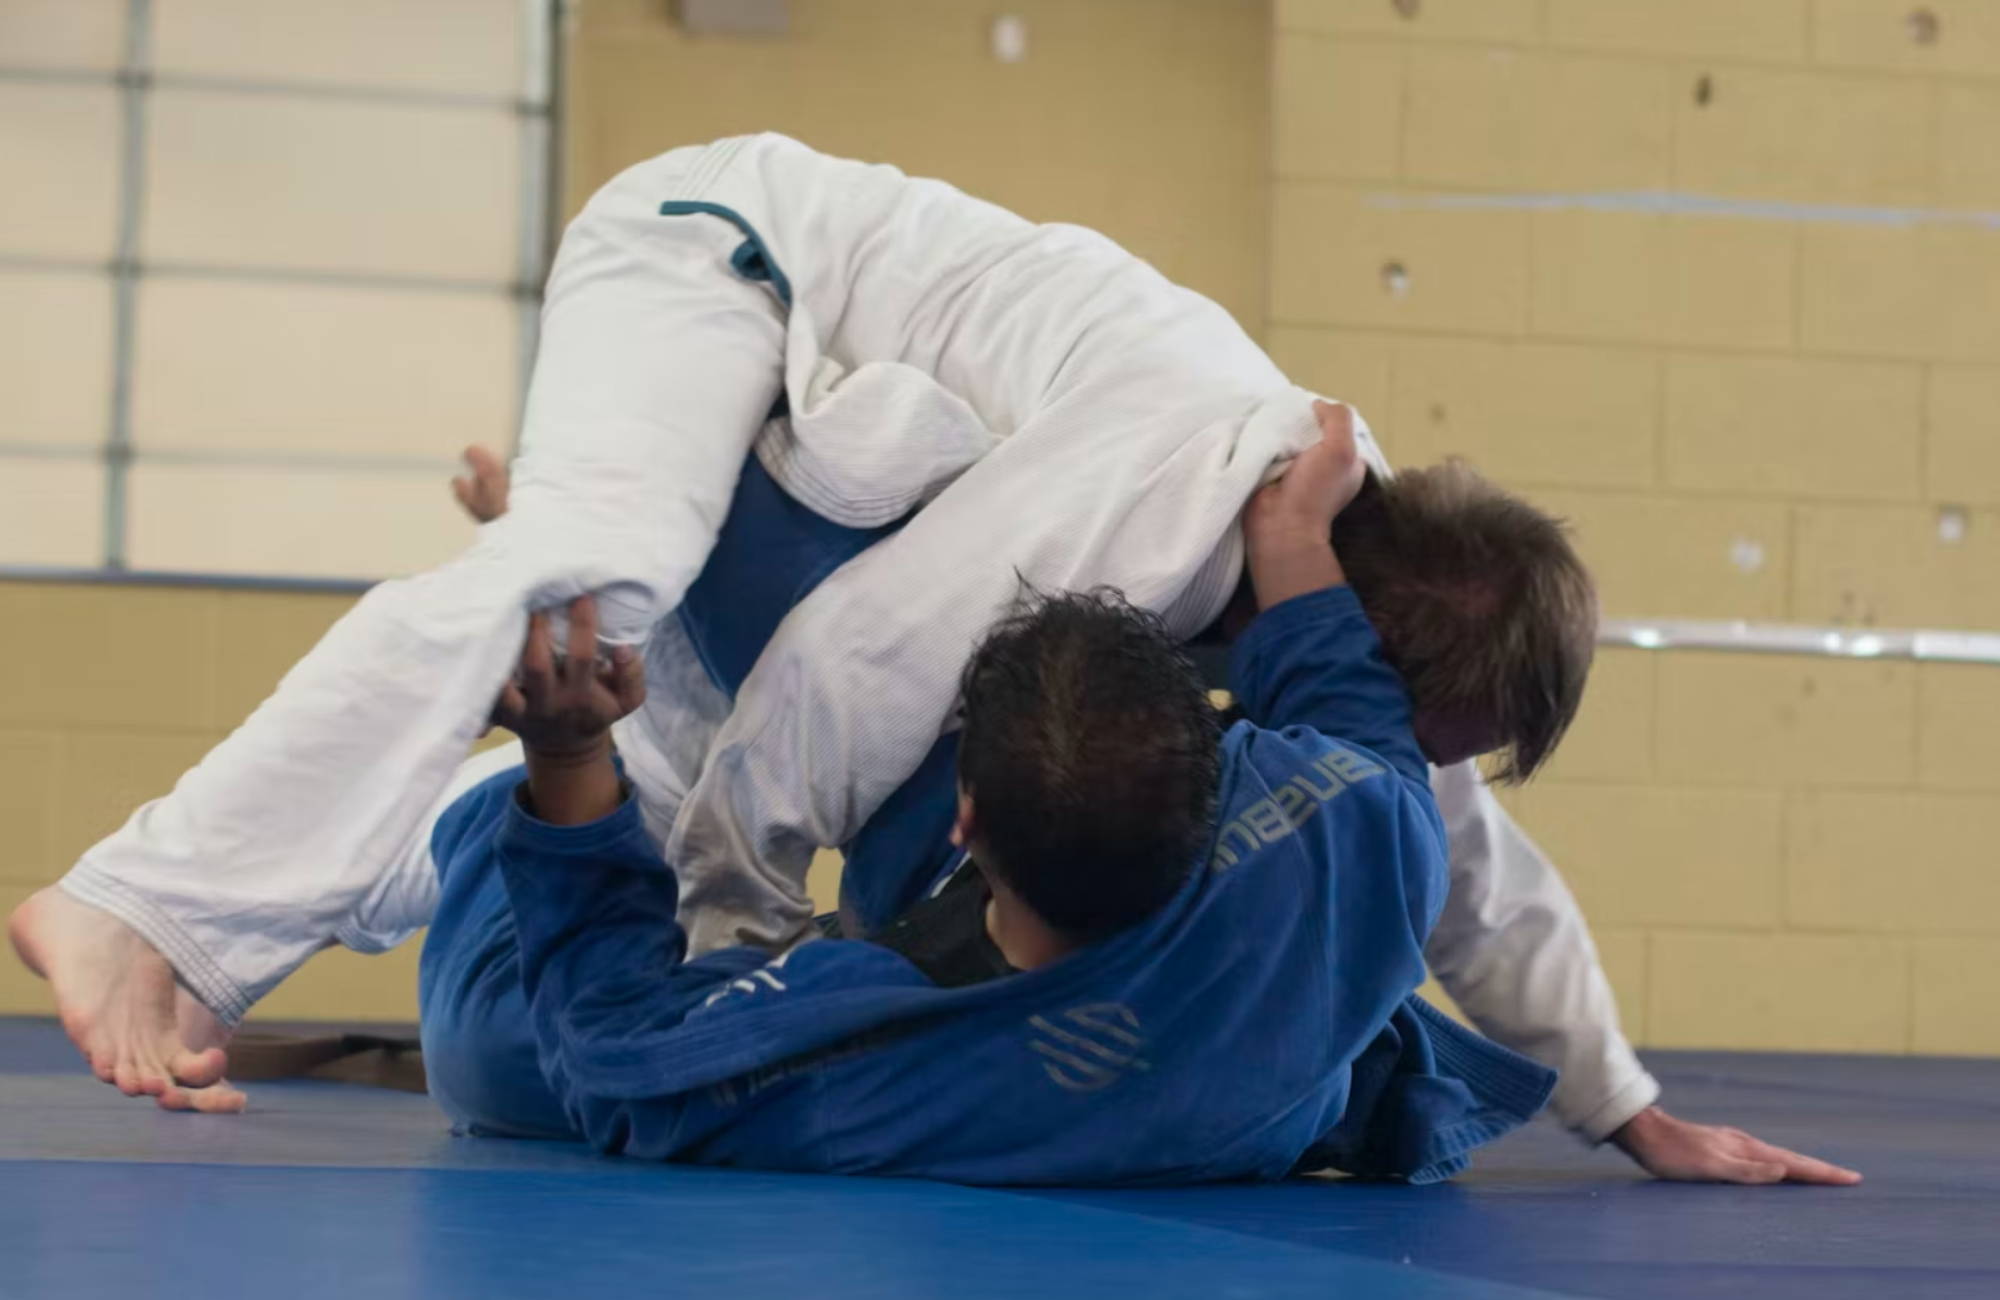  two men, one in a white gi and the other in a blue gi, grappling